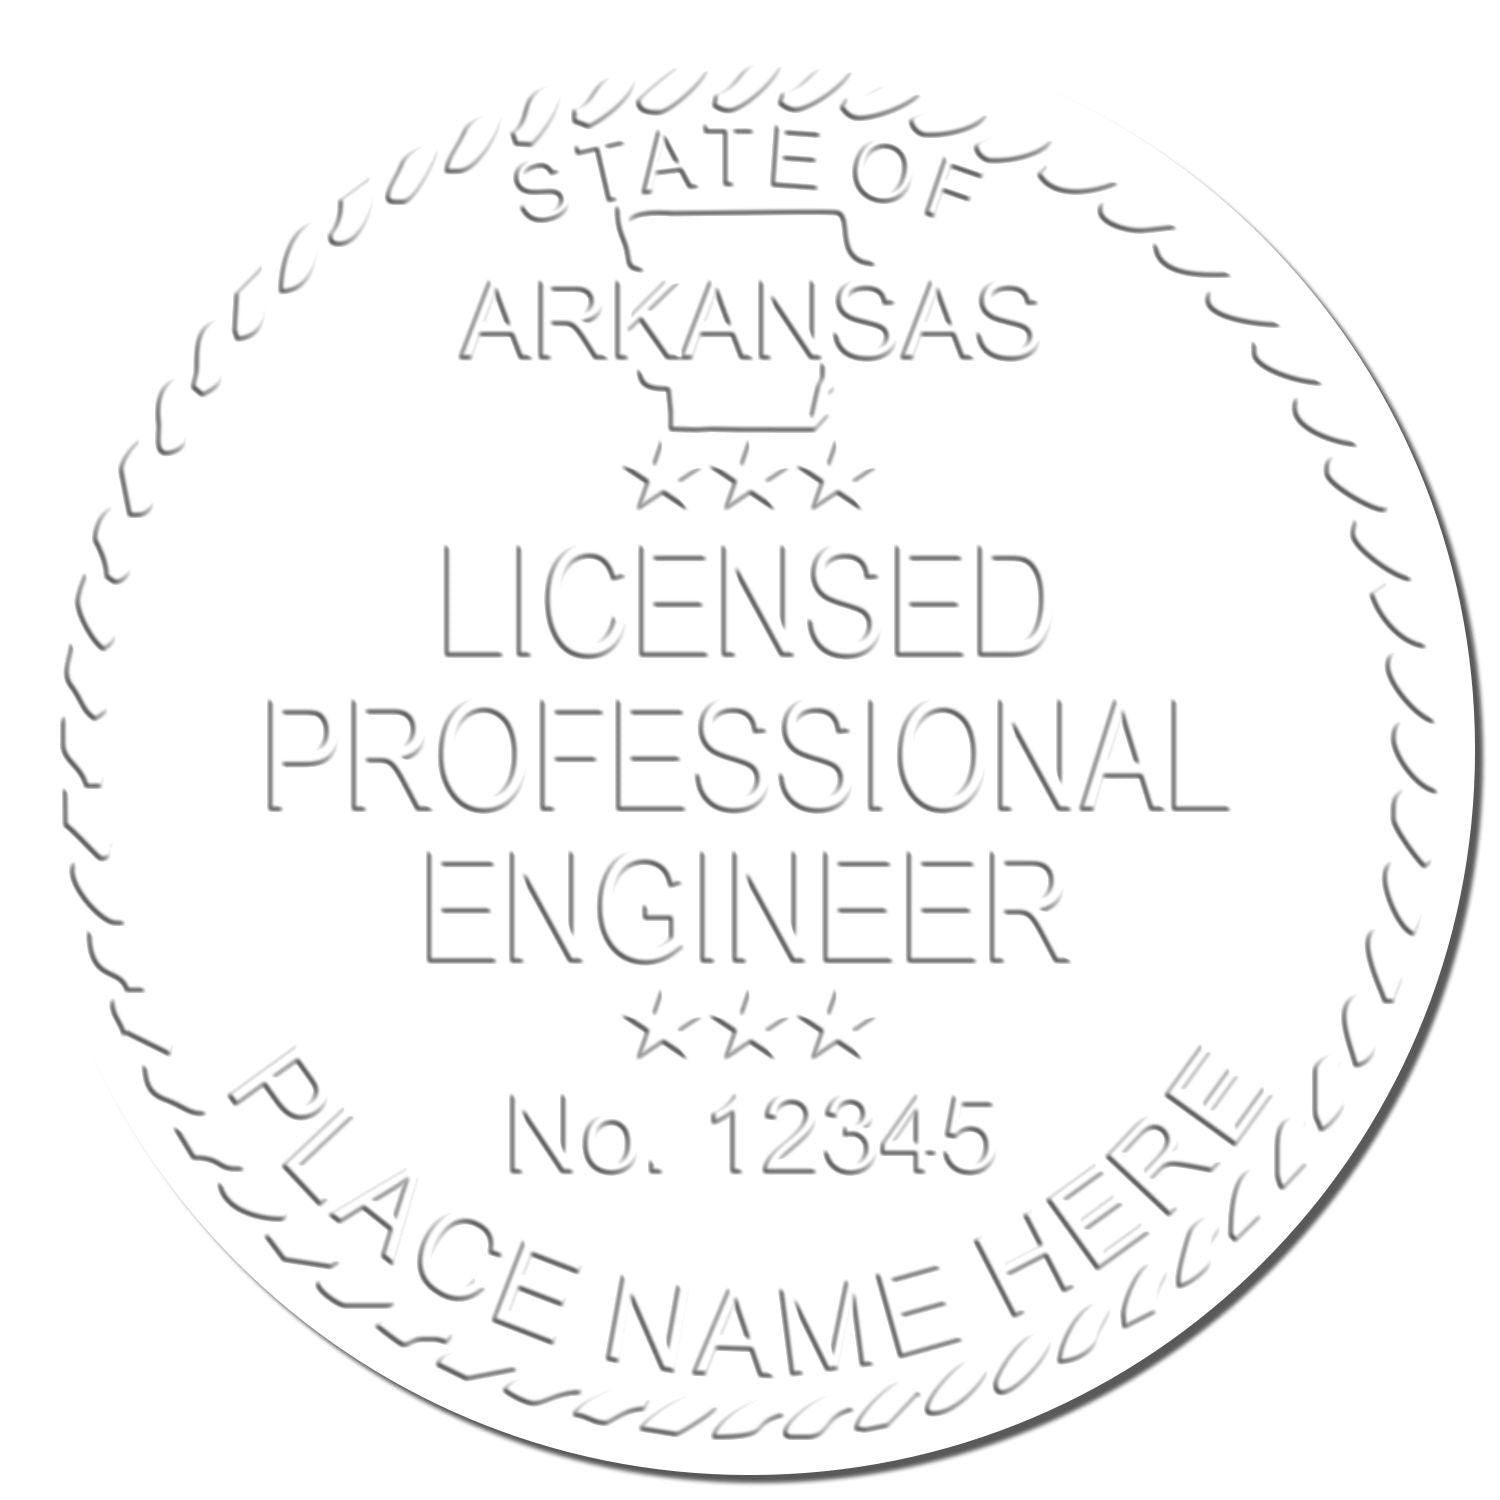 The main image for the Arkansas Engineer Desk Seal depicting a sample of the imprint and electronic files